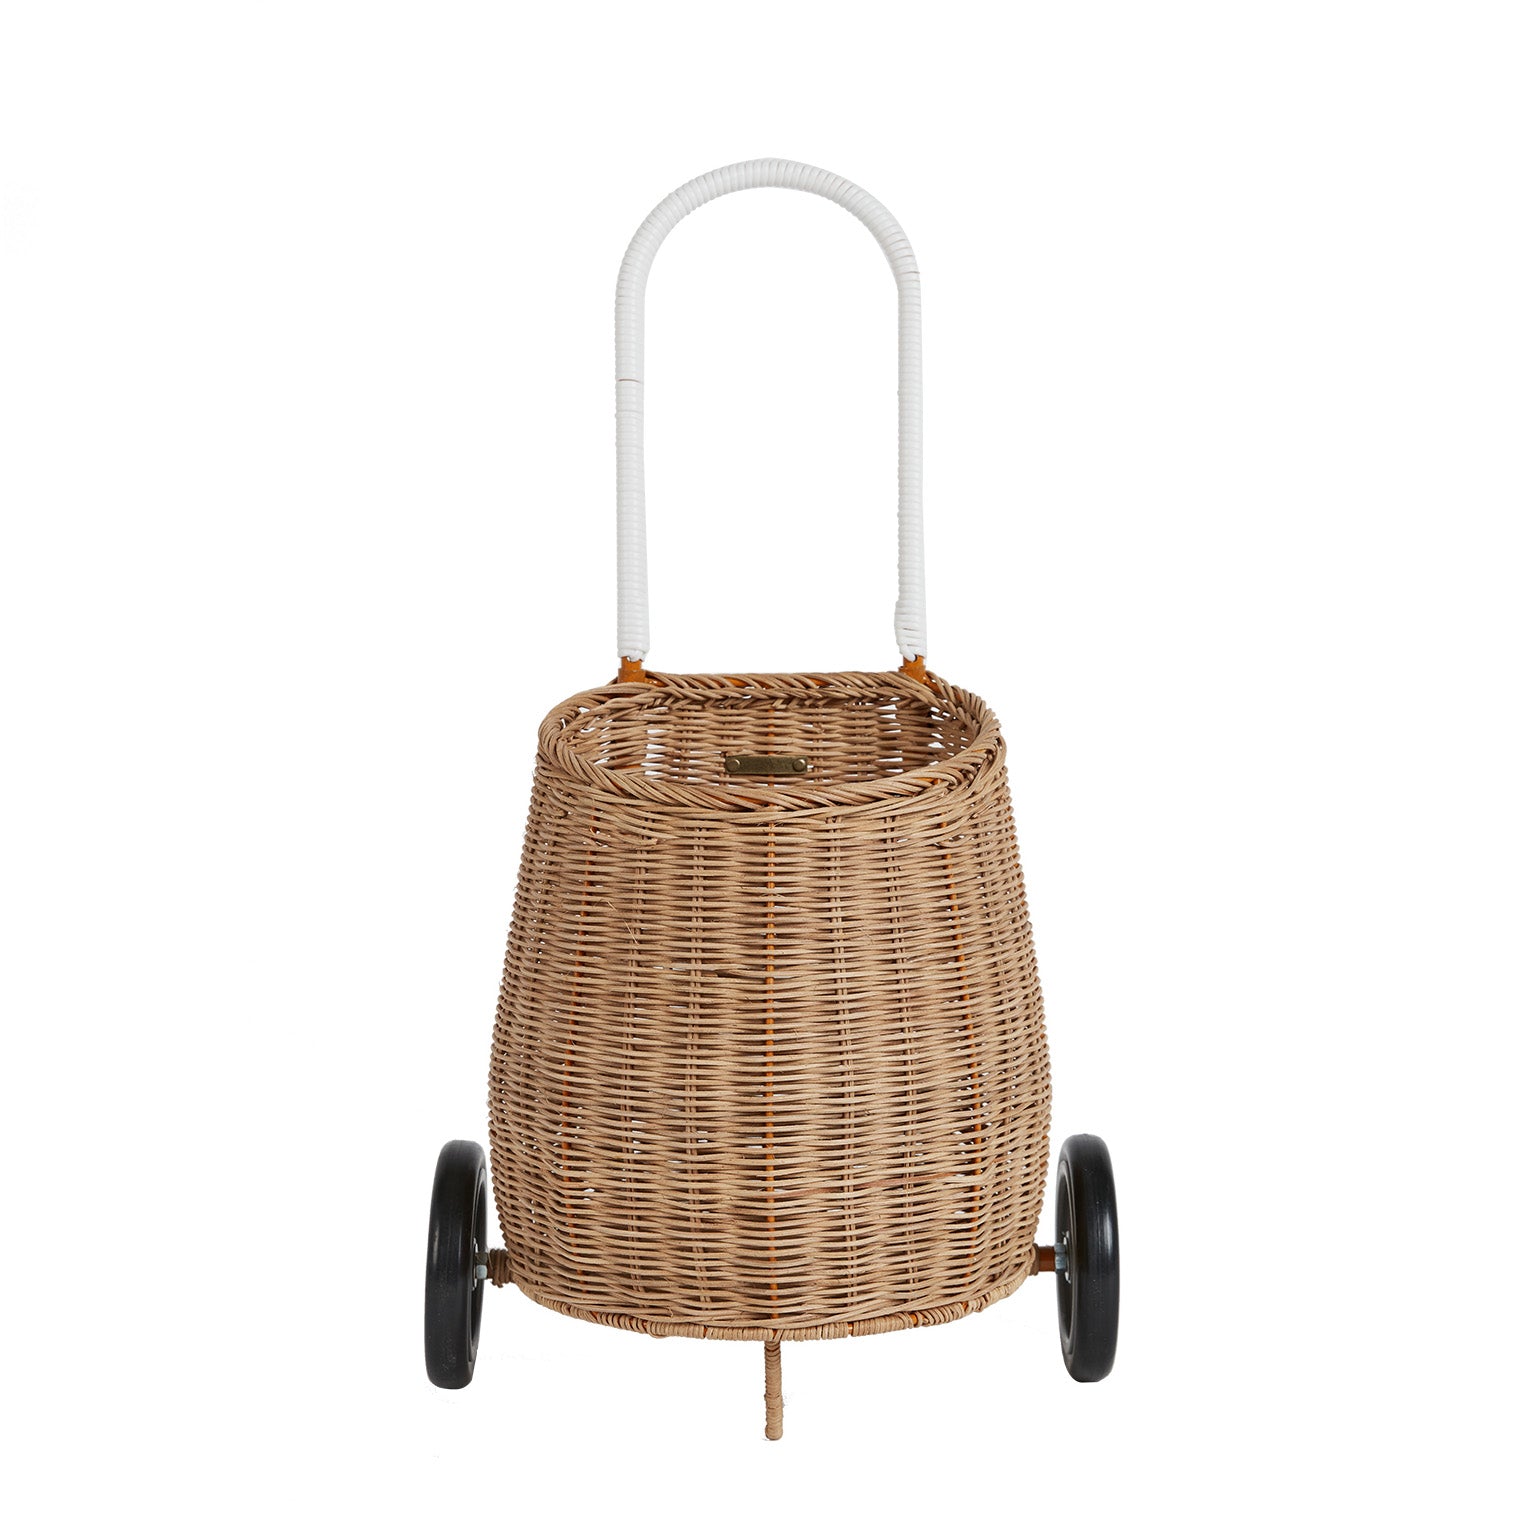 RATTAN ORIGINAL LUGGY (Available in 3 colors)